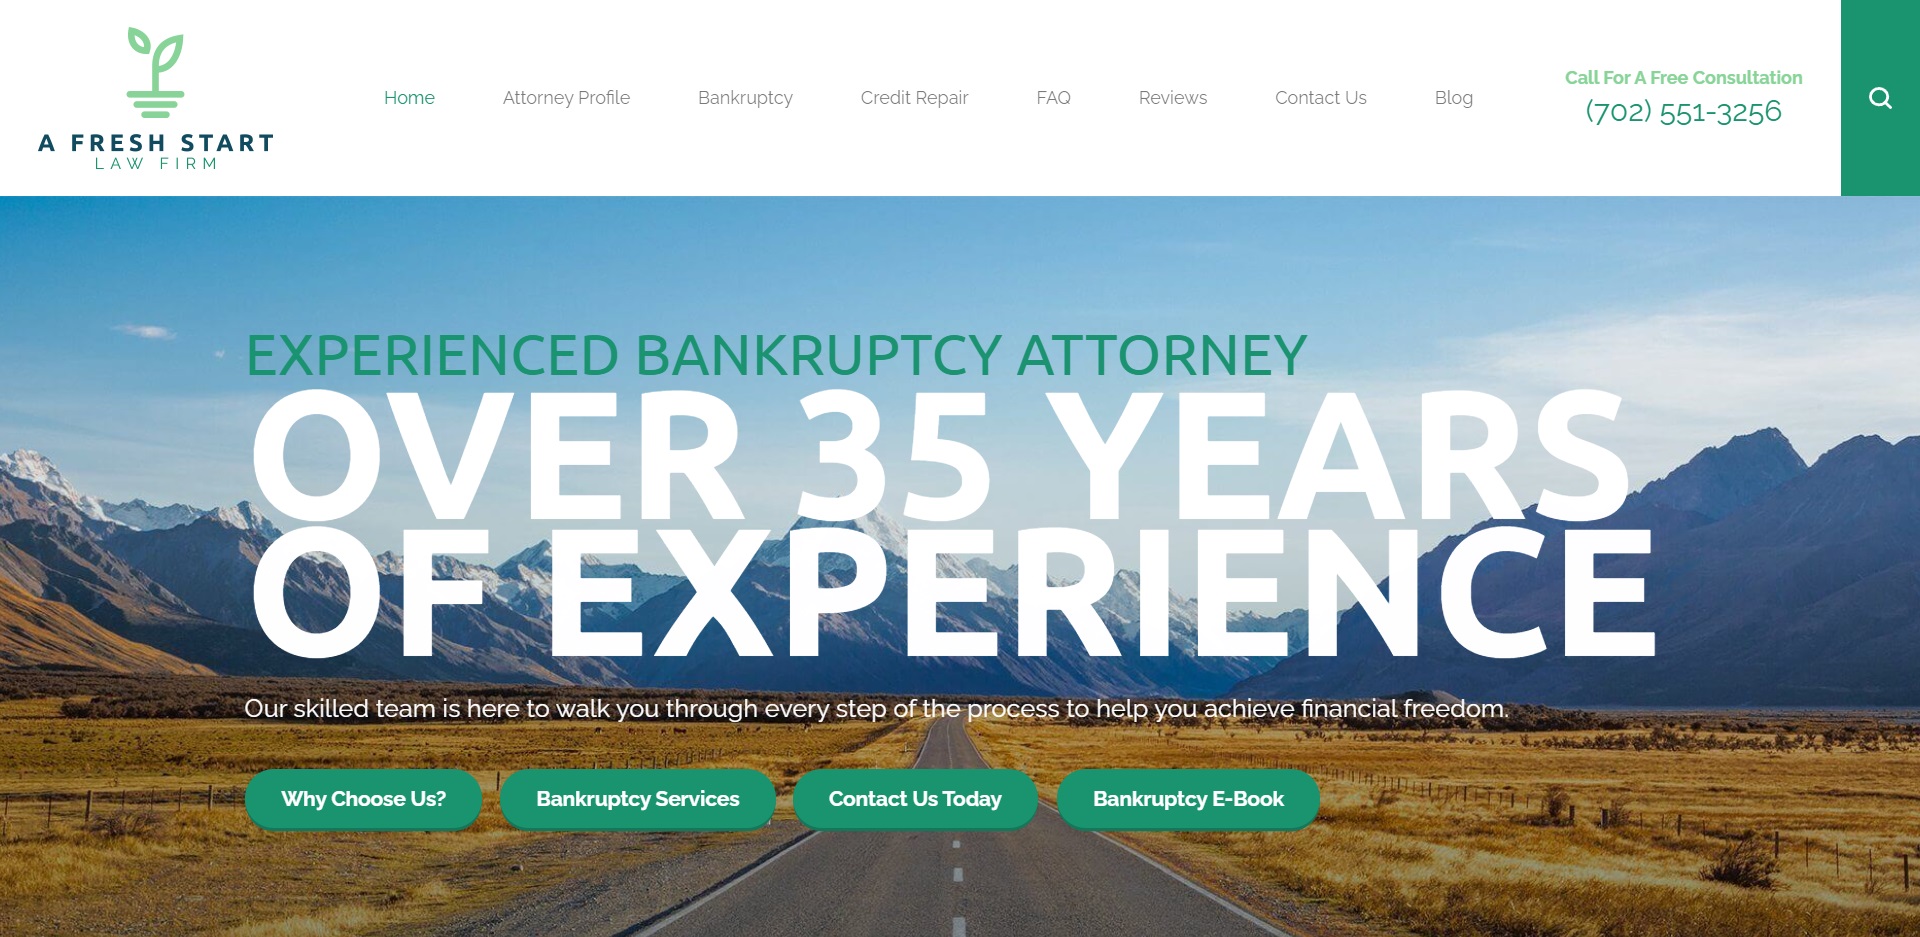 The Best Bankruptcy Attorneys in Las Vegas, NV